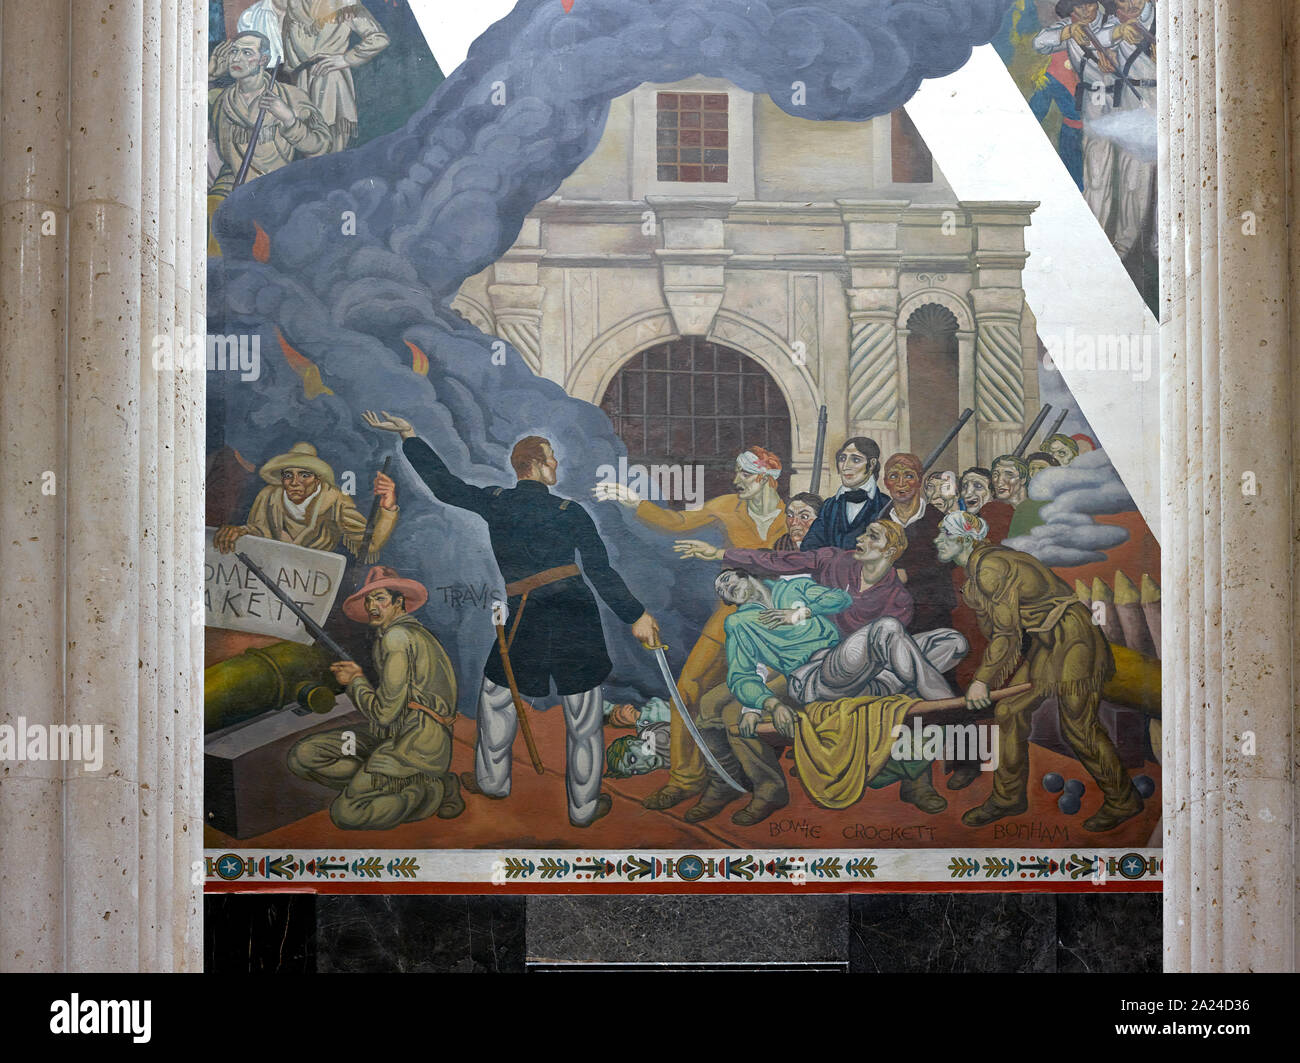 Part of a carefully restored mural, one of dozens at Fair Park, site of the 1936 Texas Centennial celebration and the Pan-American Exposition in 1937 in Dallas, Texas Stock Photo